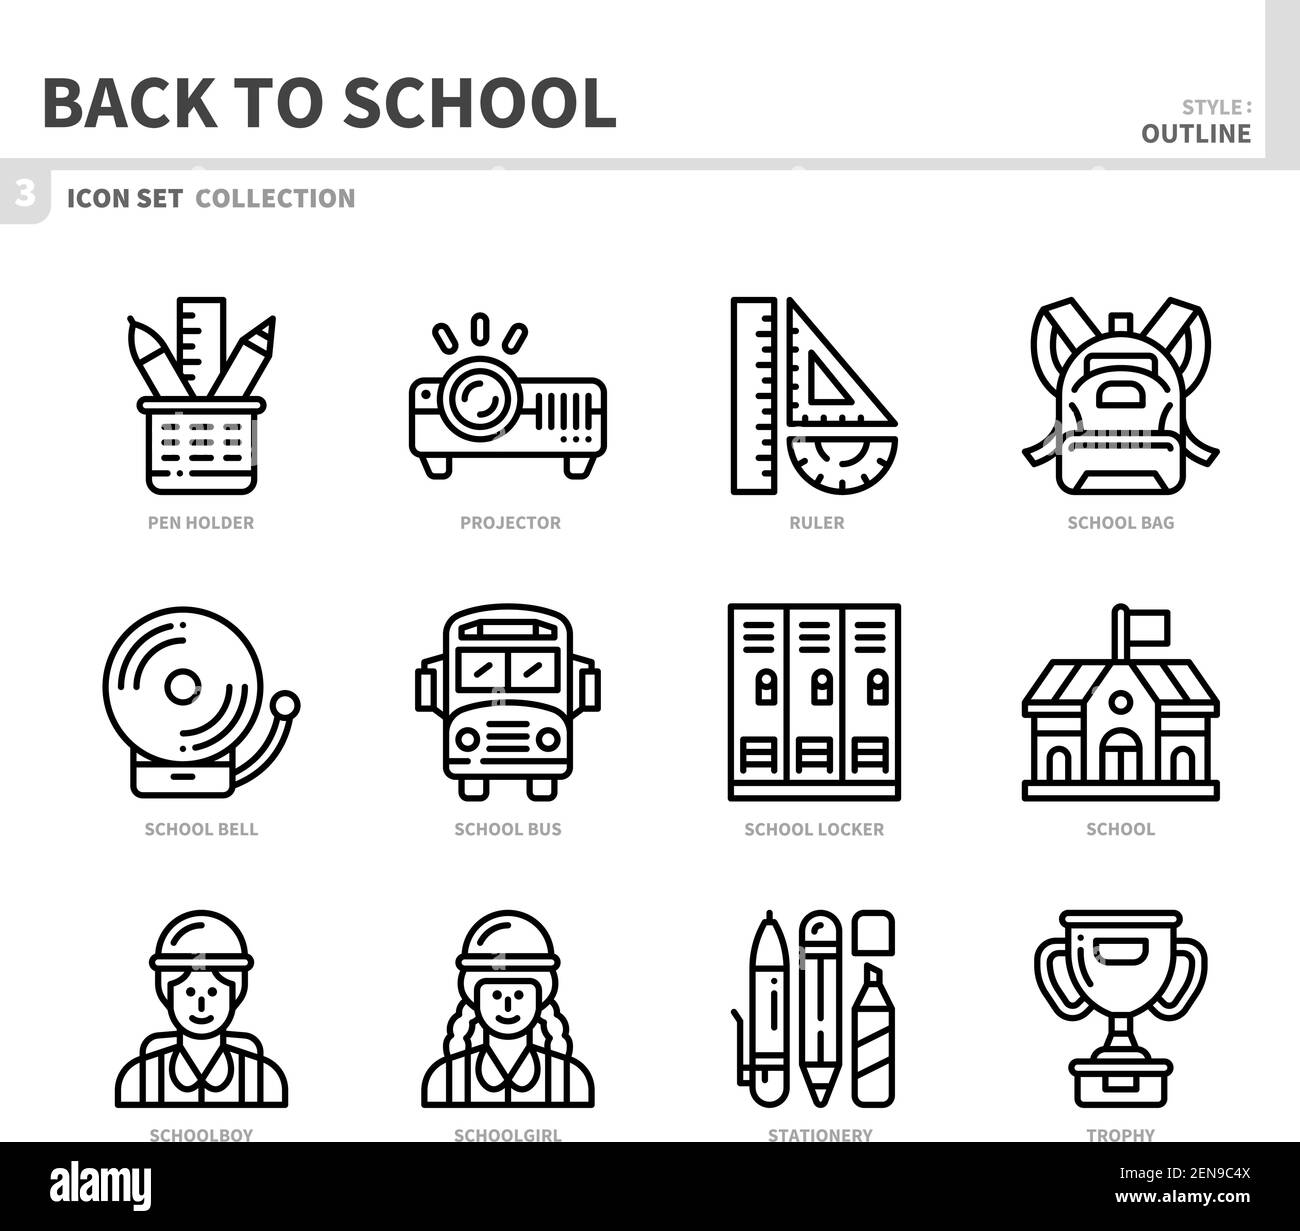 back to school icon set,outline style,vector and illustration Stock Vector